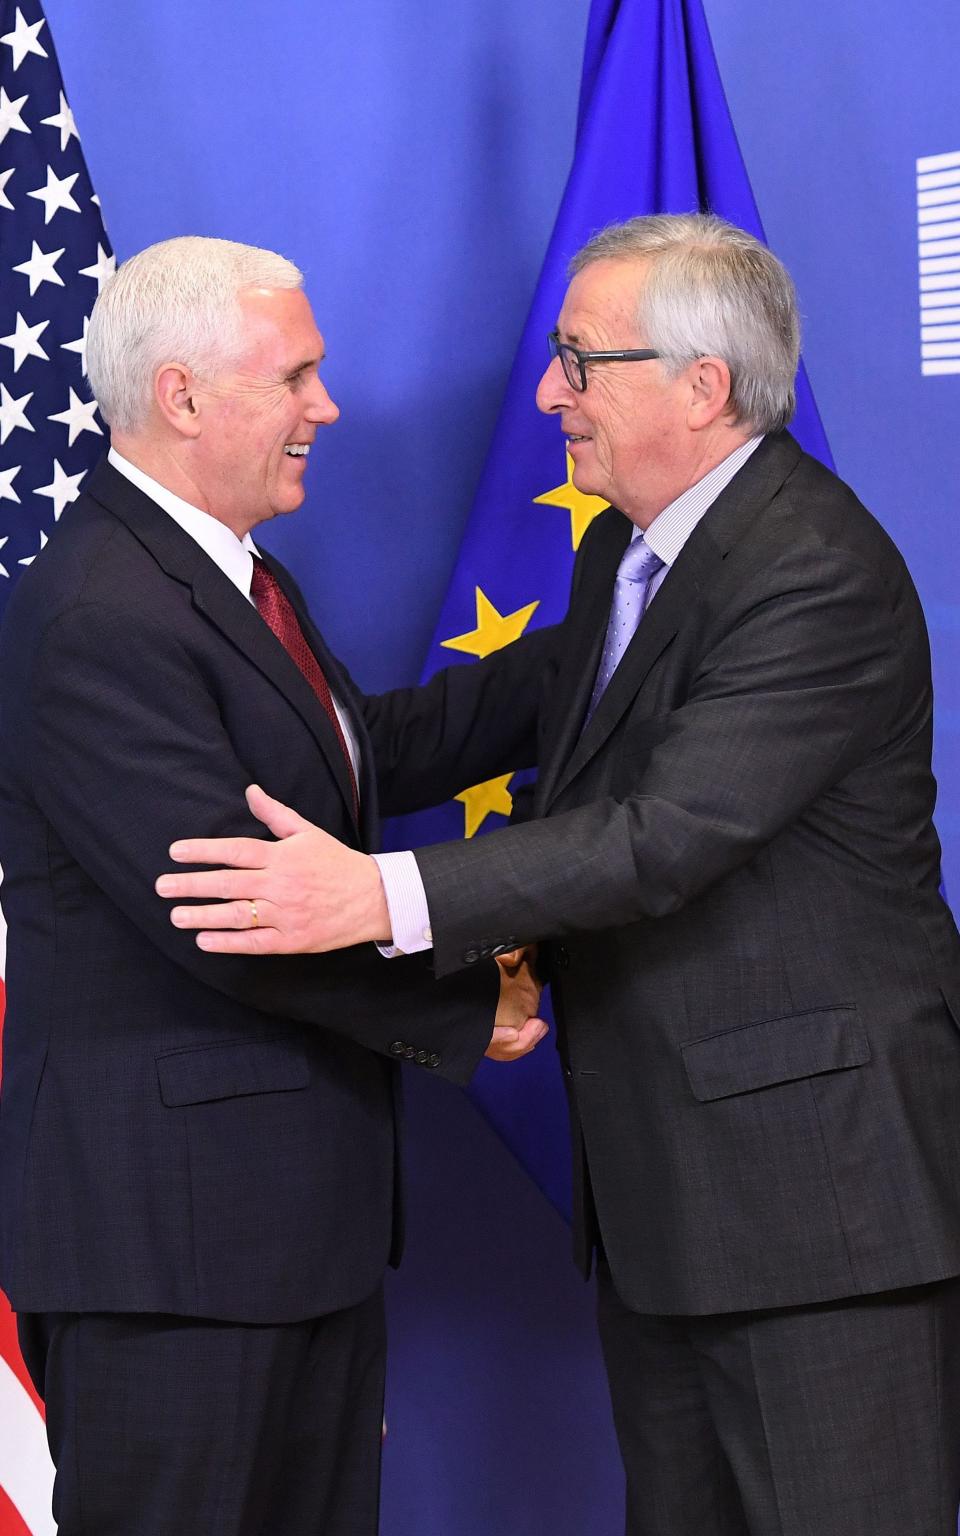 US wants to deepen its relationship with the EU, vice president Mike Pence says on Brussels visit